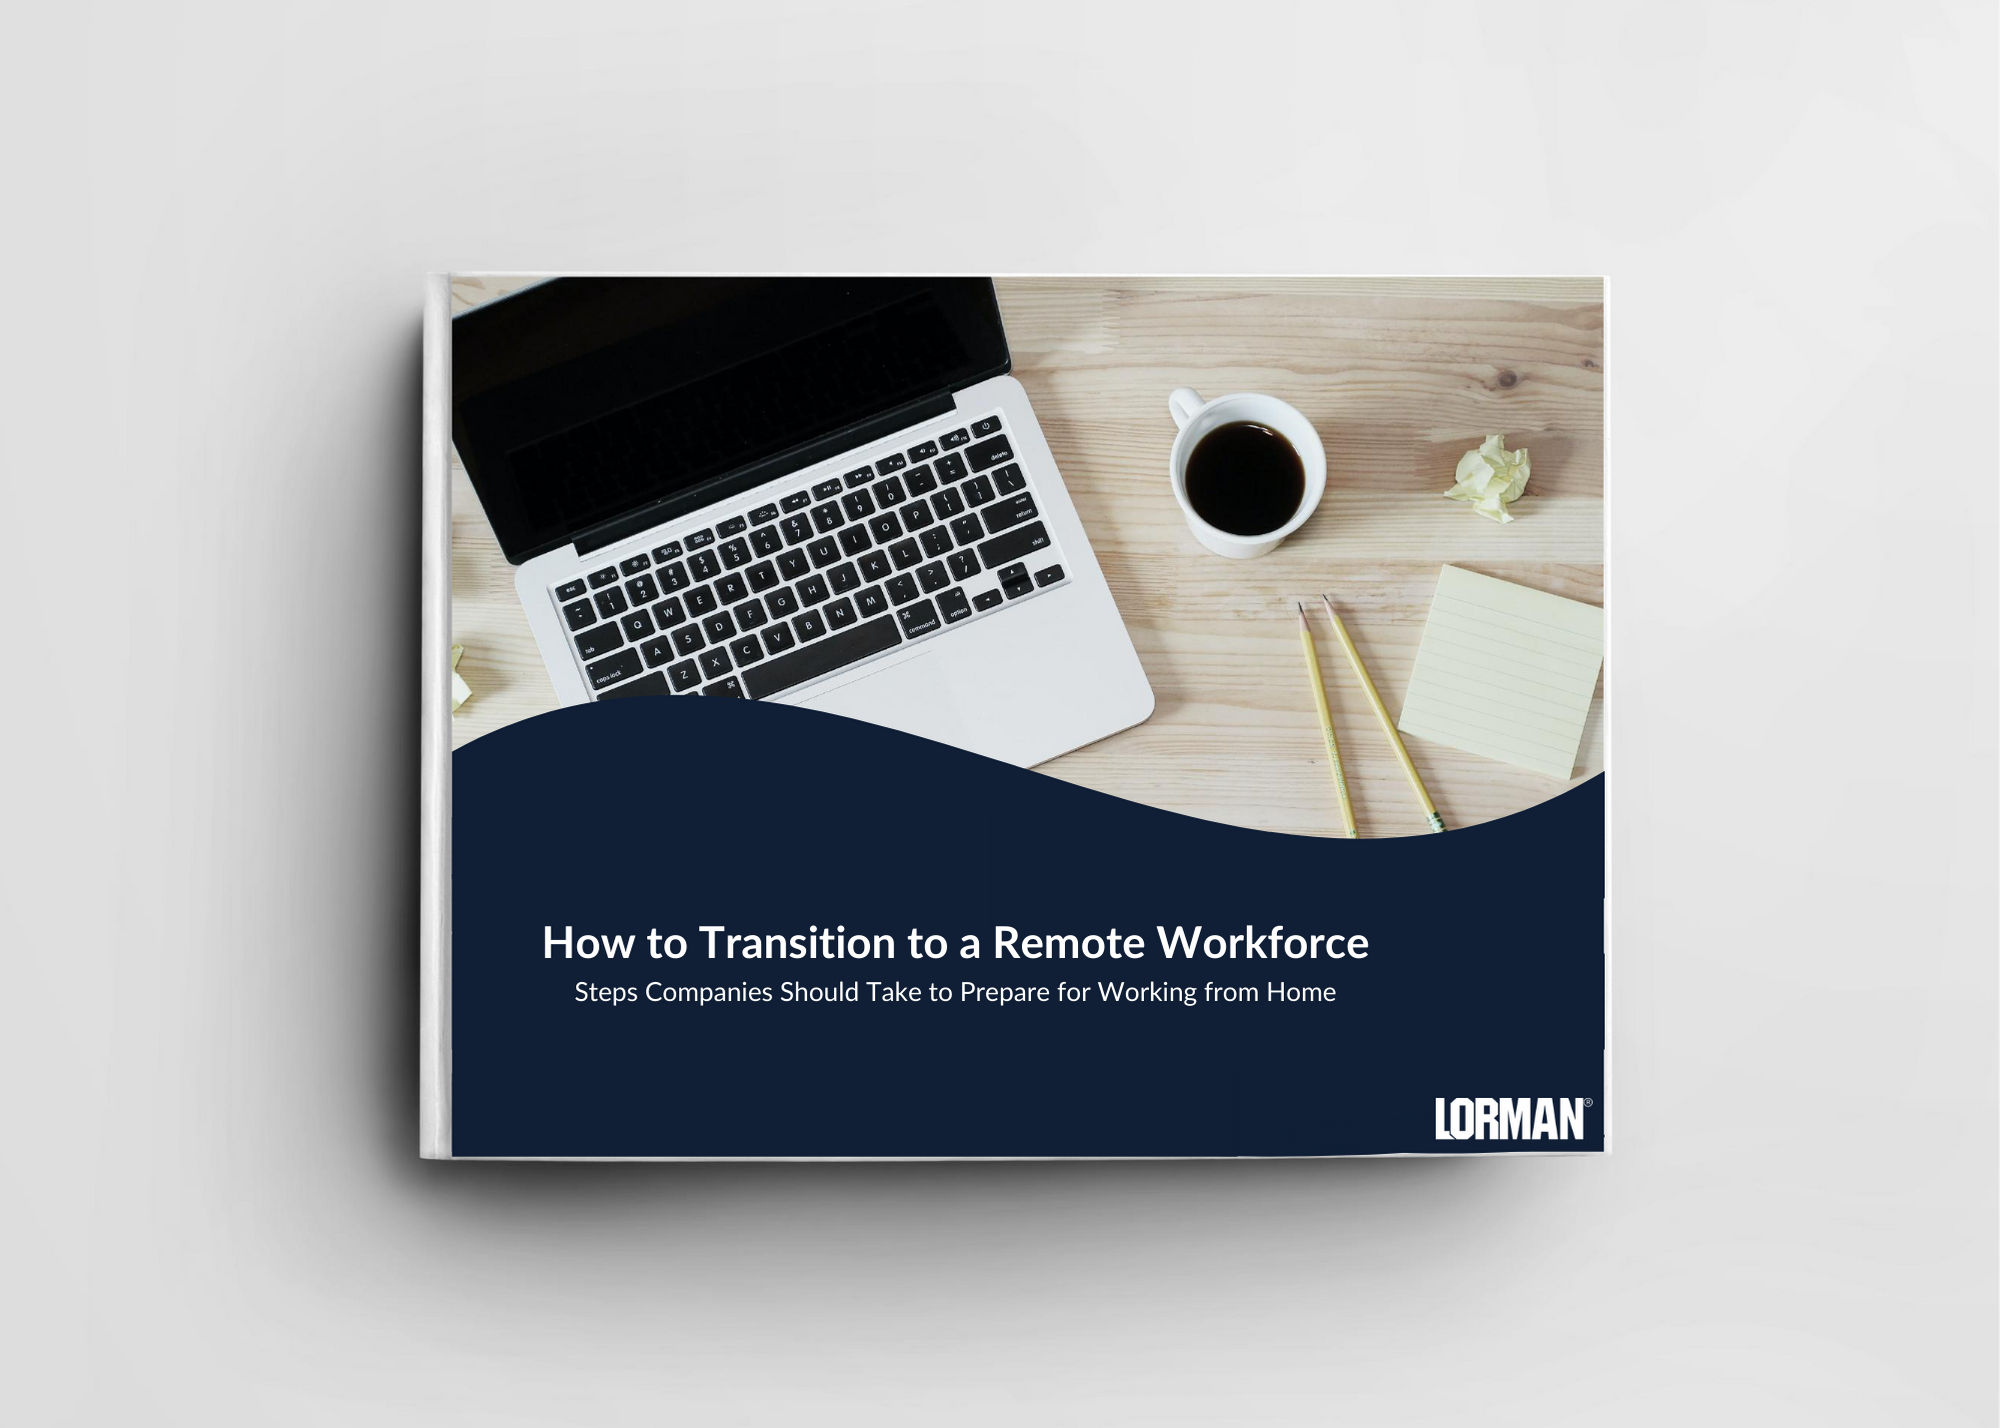 How to Transition to a Remote Workforce: Steps Companies Should Take to Prepare for Working from Home [eBook]